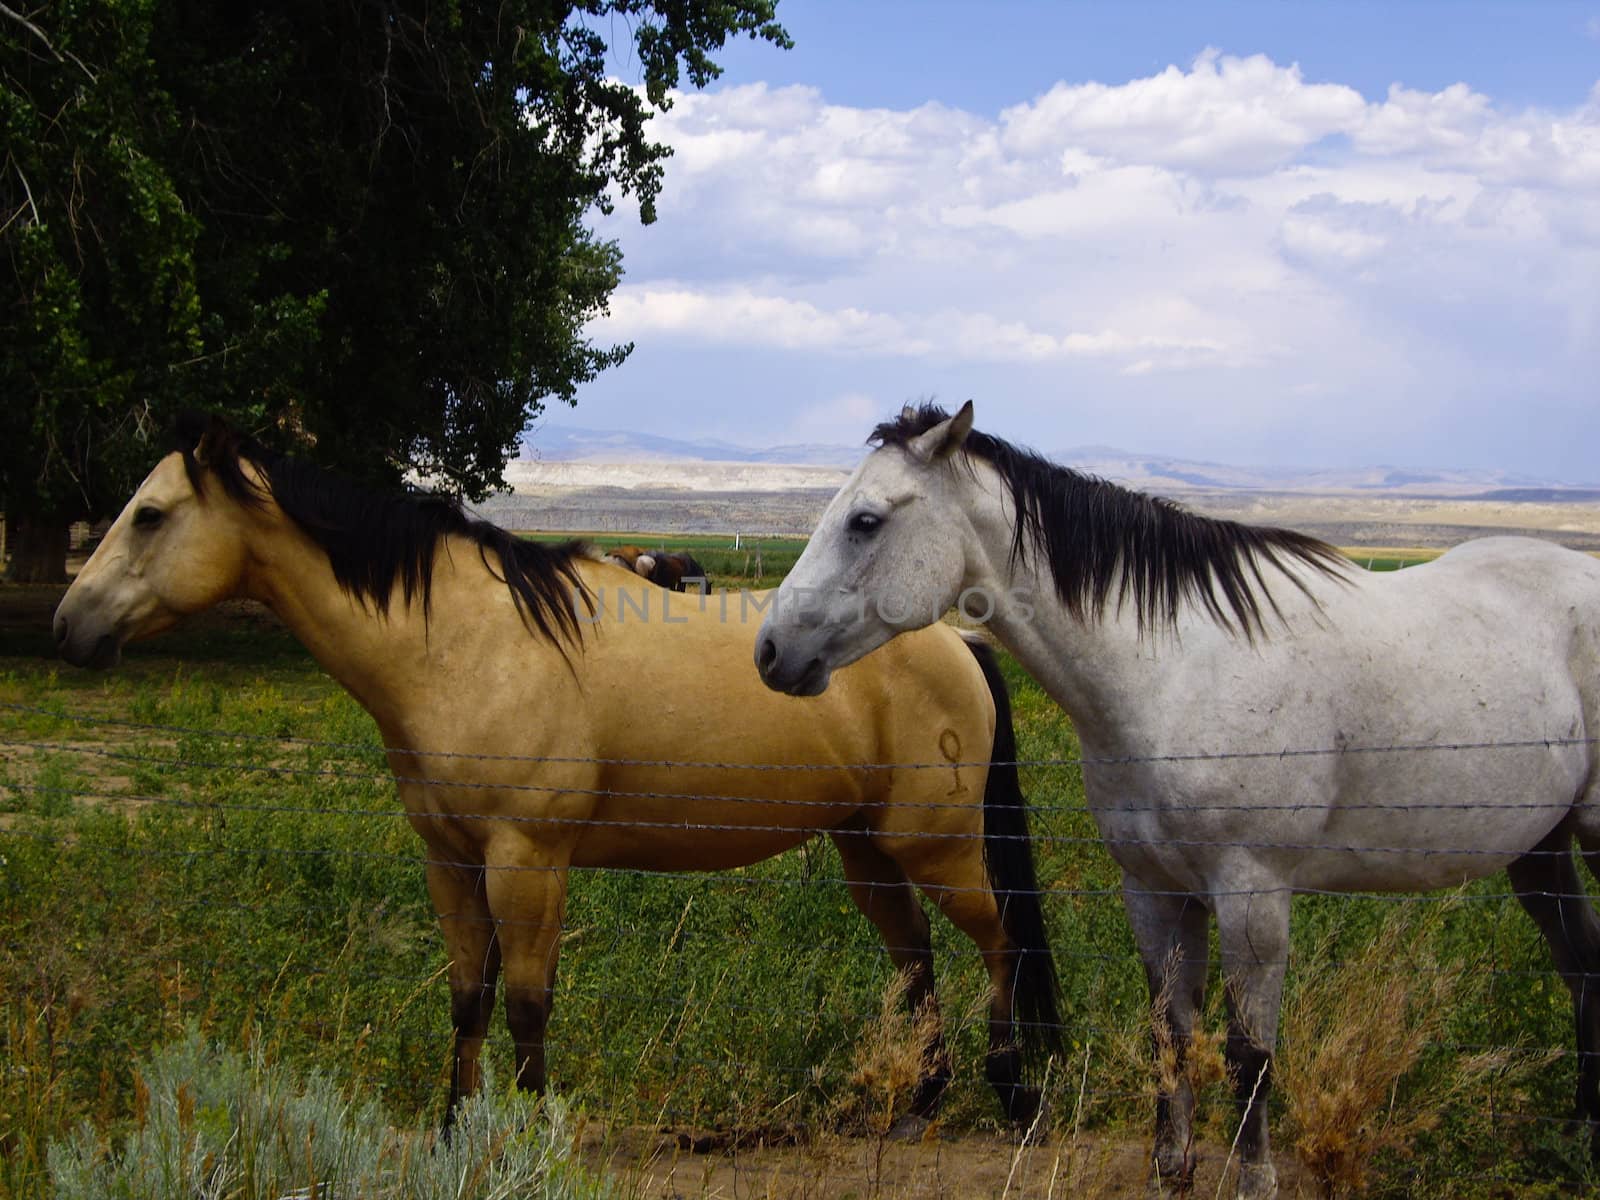 Two horses watch the world go by in Montana